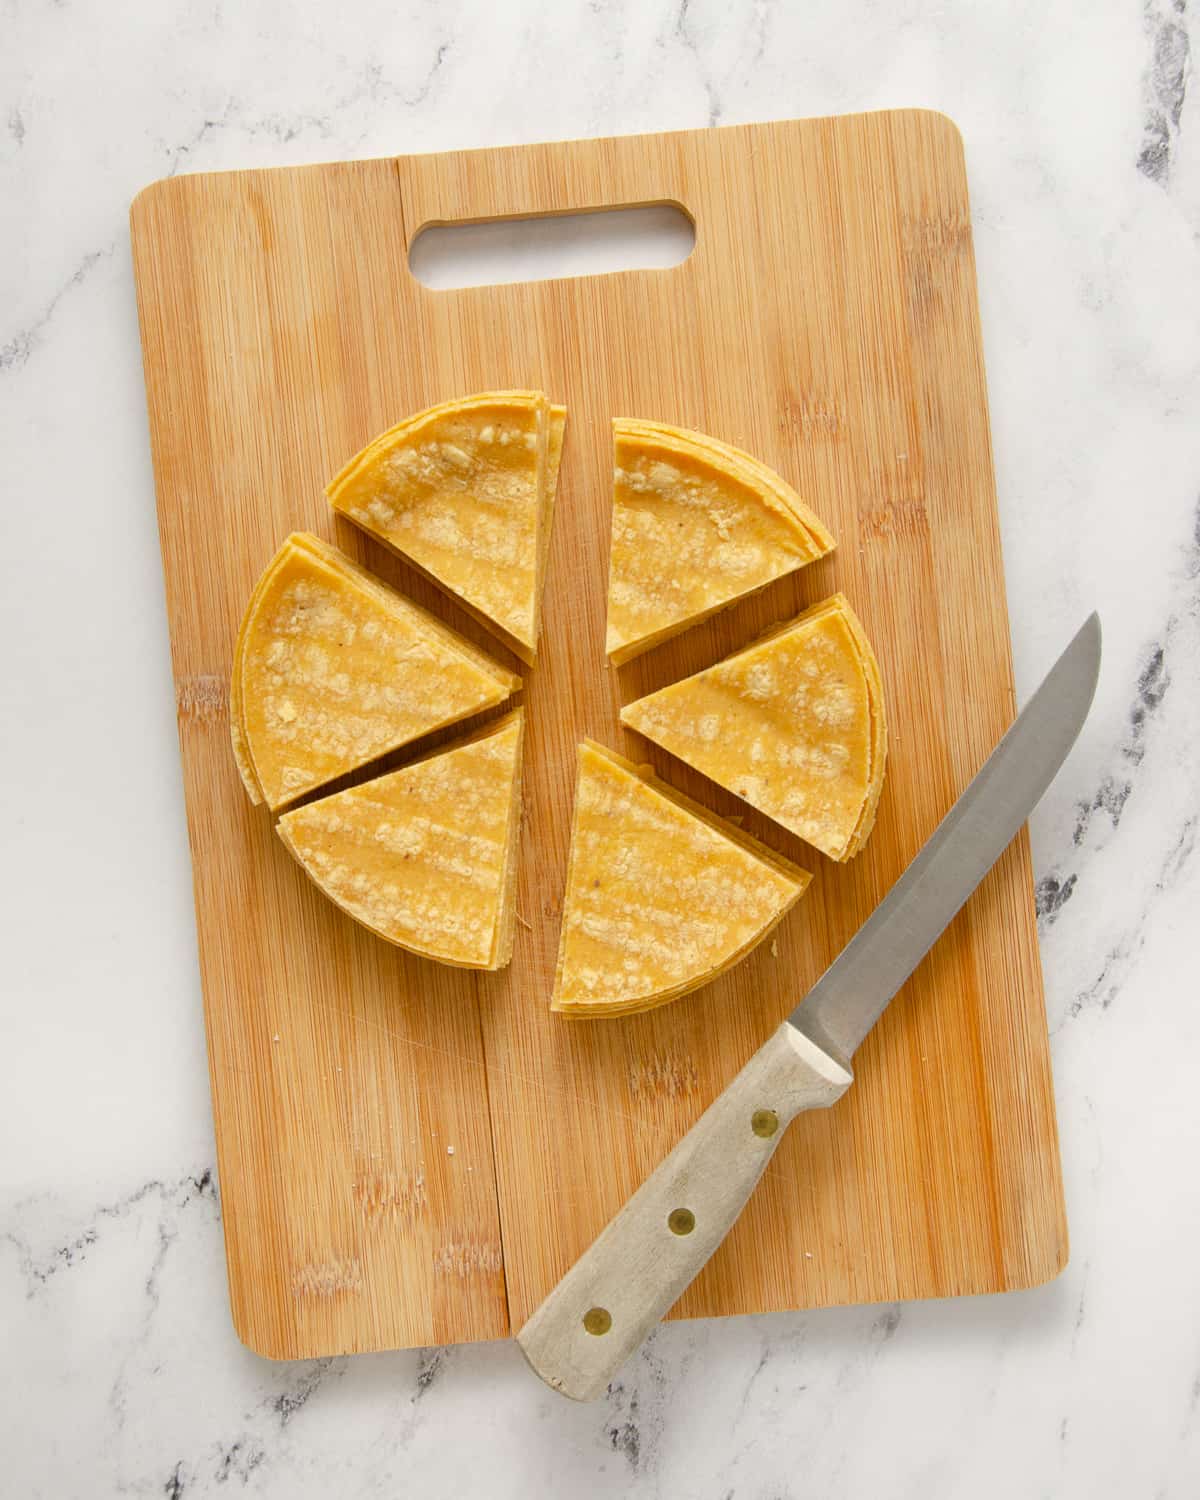 Corn tortillas cut into 6 equal-sized pieces on a cutting board.